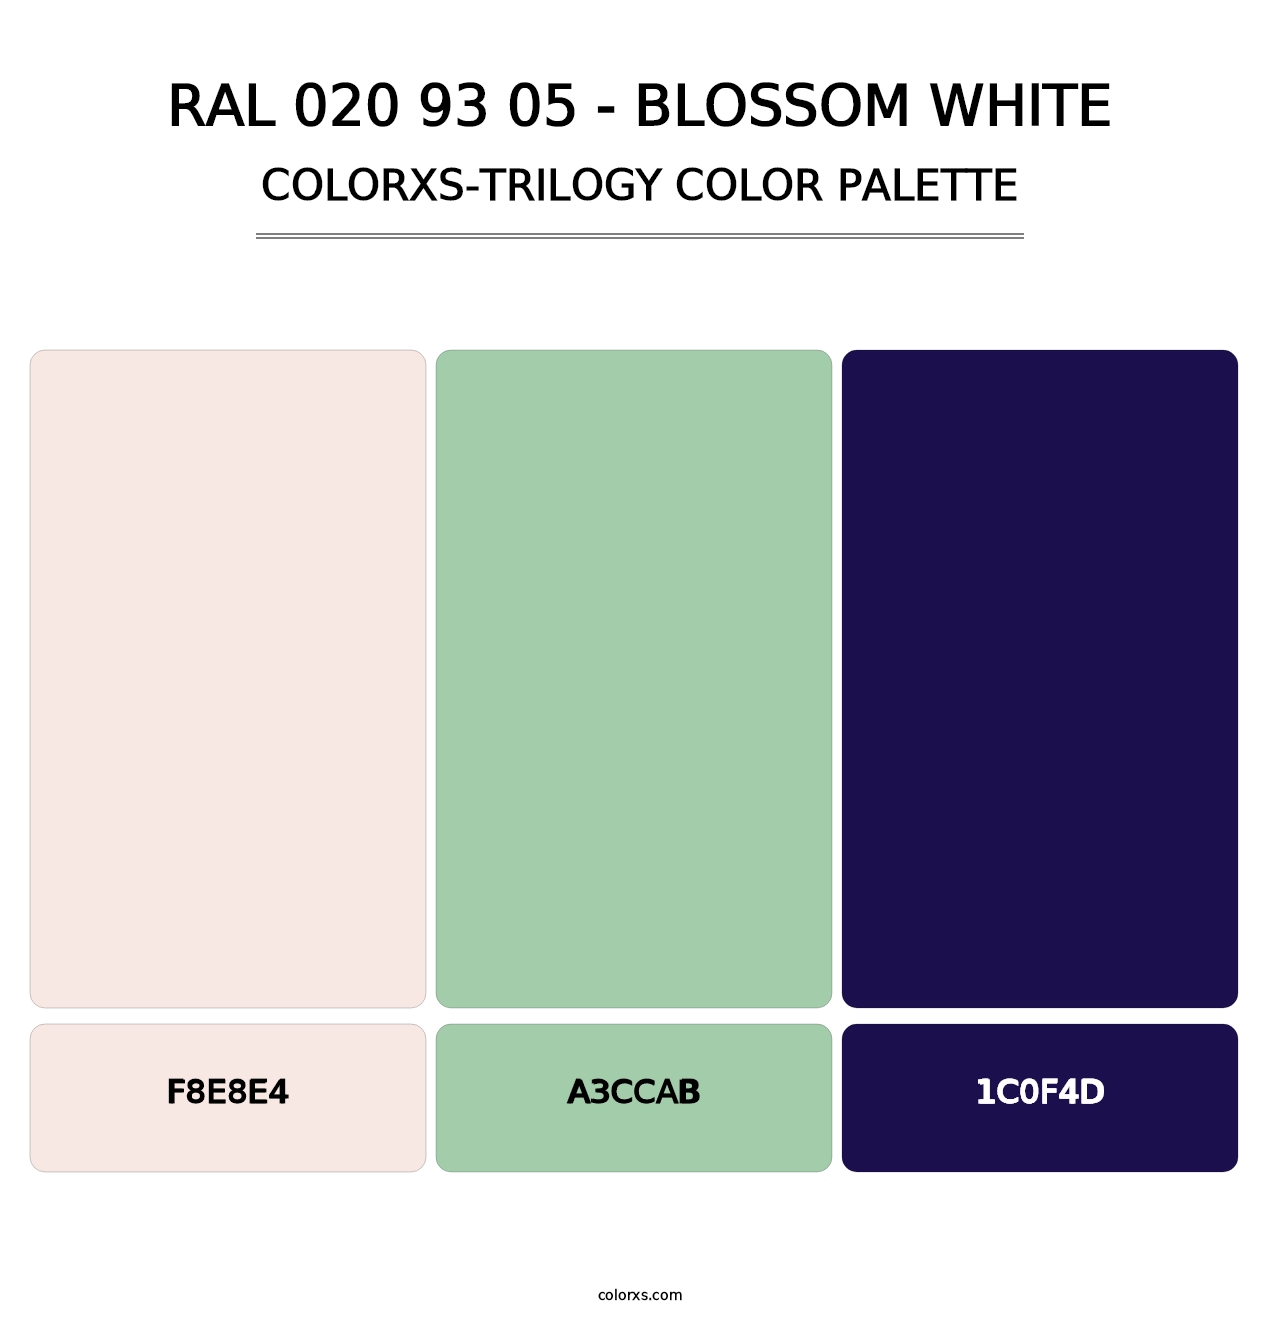 RAL 020 93 05 - Blossom White - Colorxs Trilogy Palette